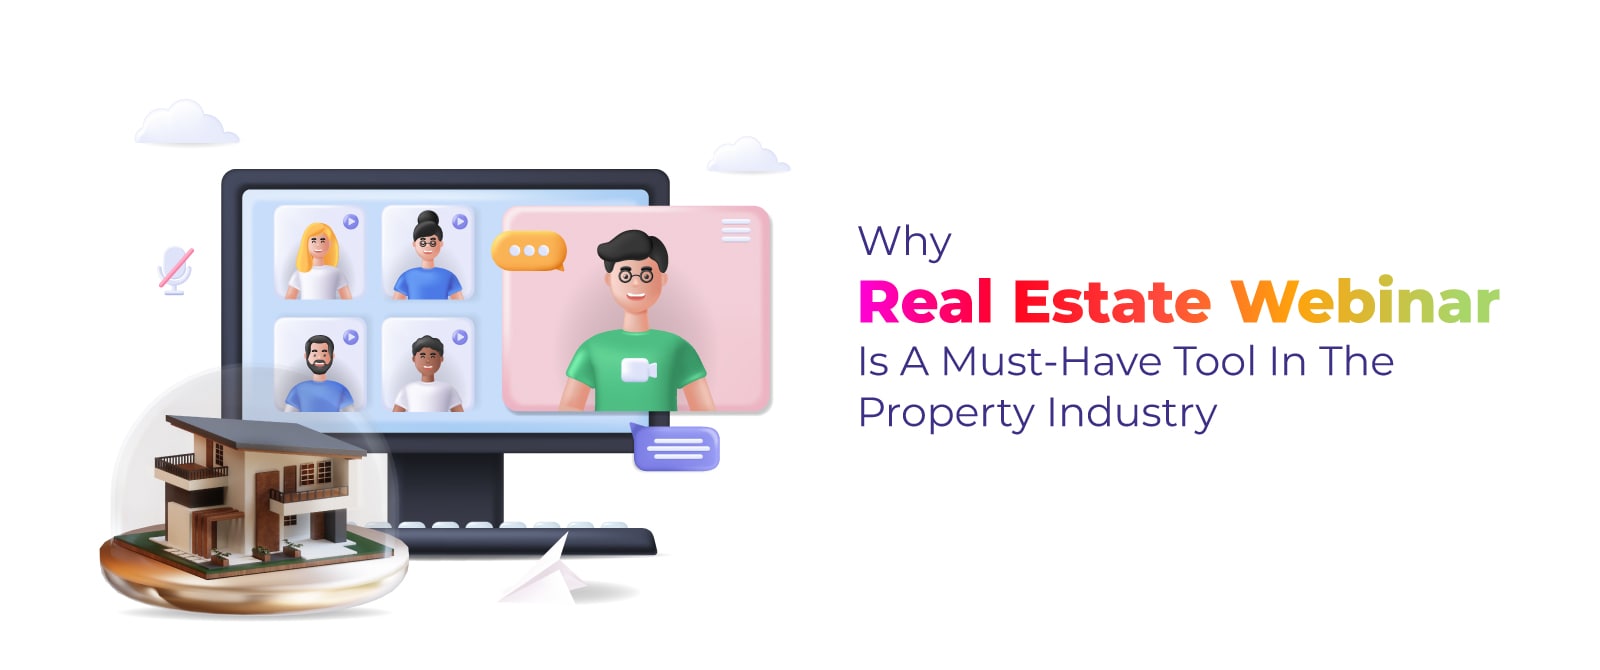 How Real Estate Webinars Influence the Property Sector